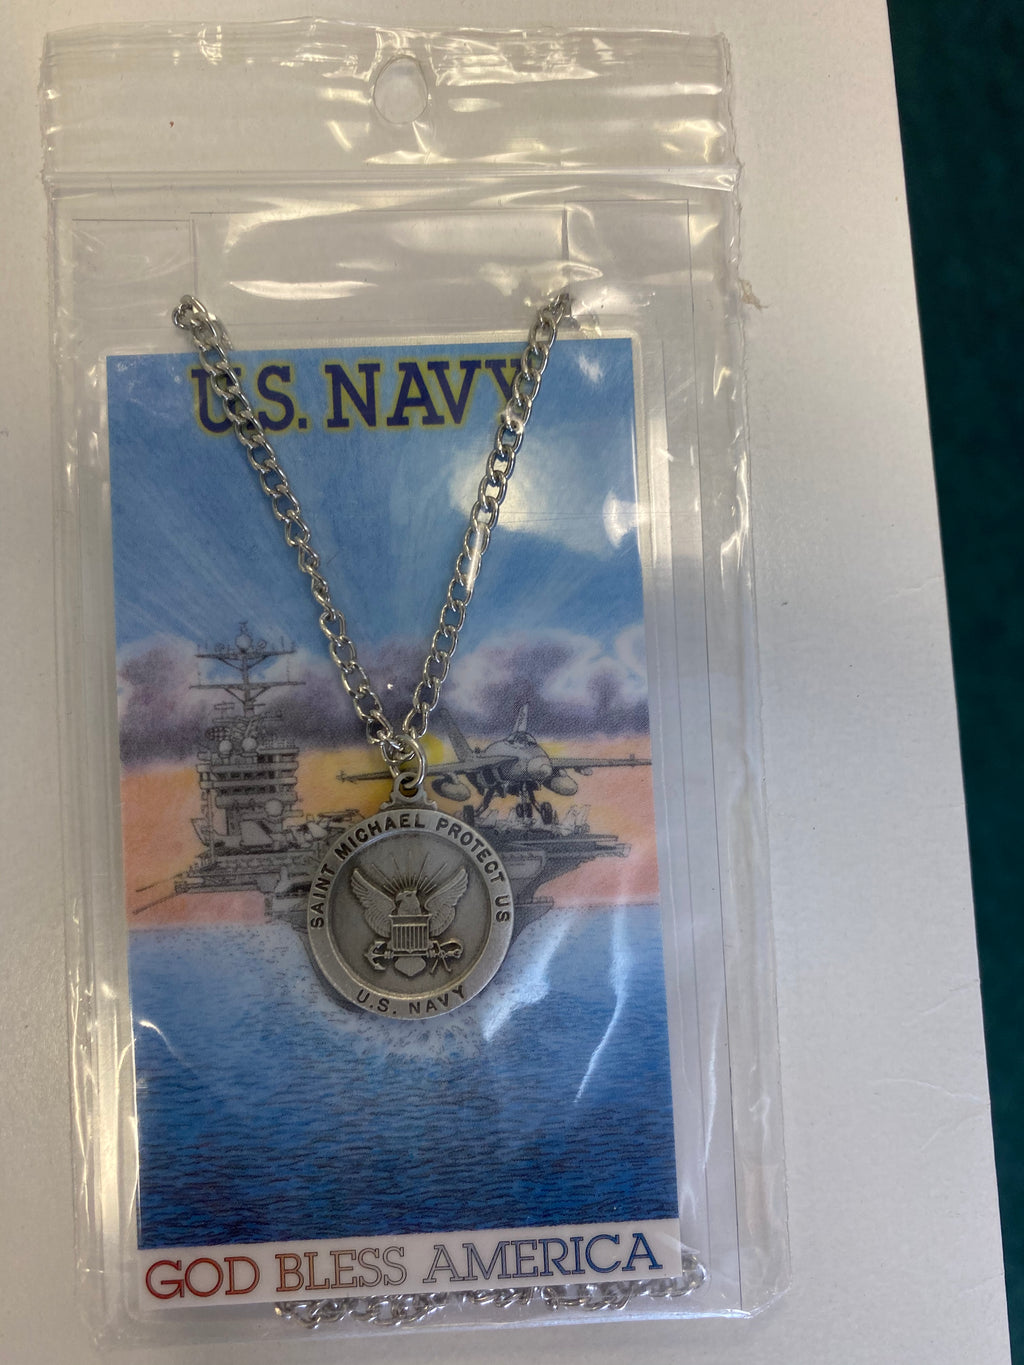 US navy medal with prayer card